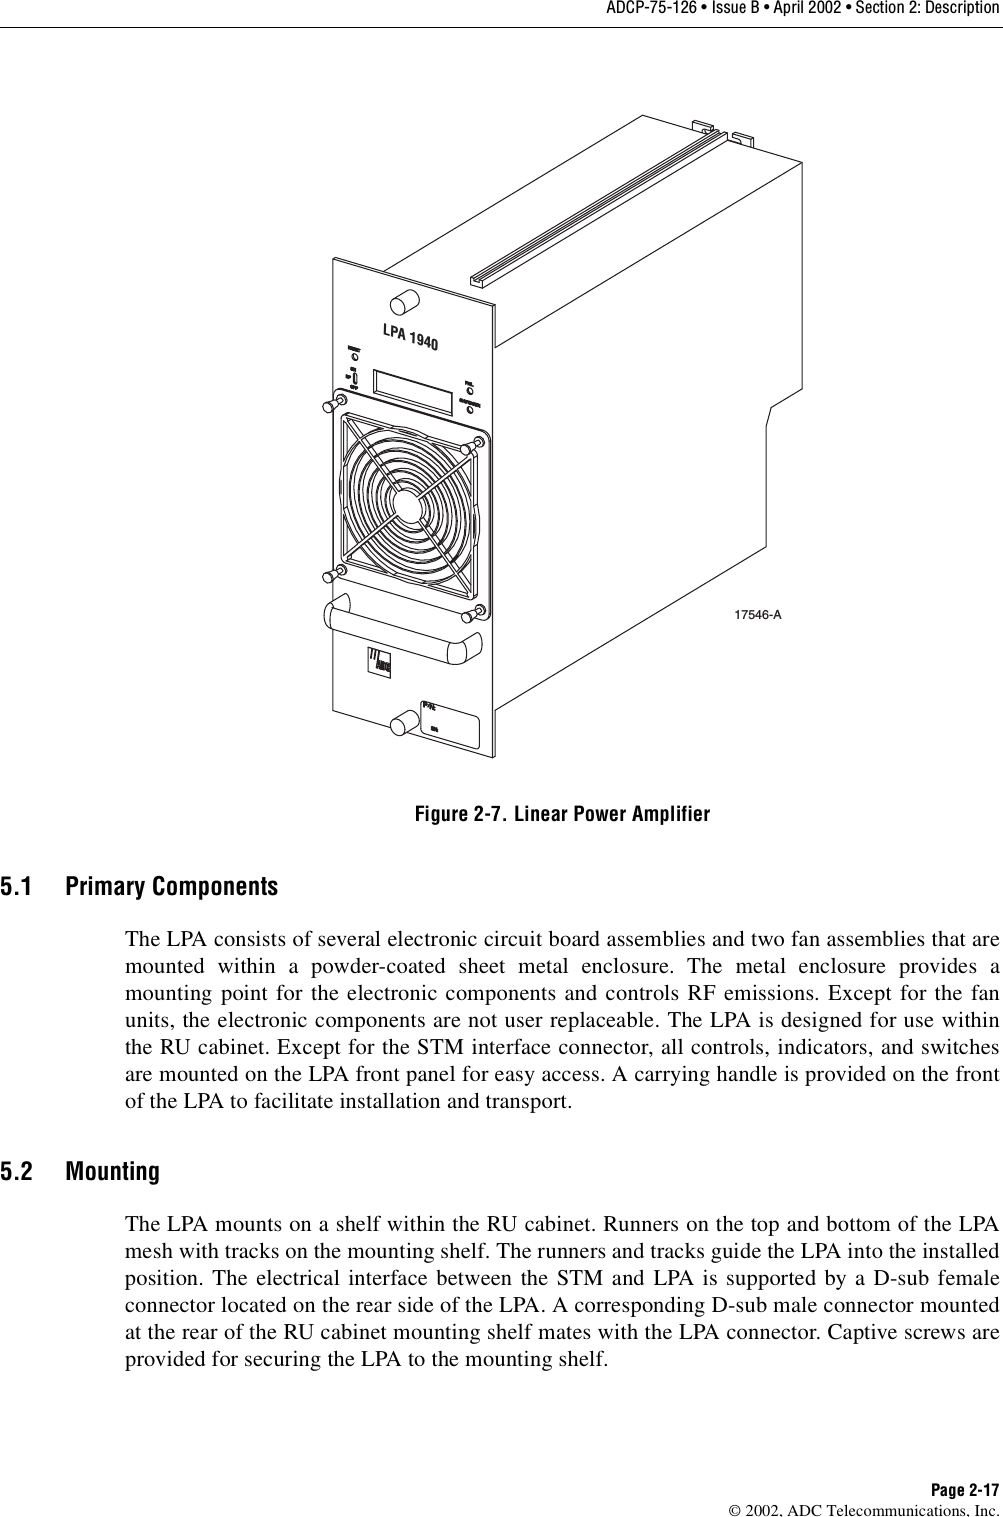 ADCP-75-126 • Issue B • April 2002 • Section 2: DescriptionPage 2-17©2002, ADC Telecommunications, Inc.Figure 2-7. Linear Power Amplifier5.1 Primary ComponentsThe LPA consists of several electronic circuit board assemblies and two fan assemblies that aremounted within apowder-coated sheet metal enclosure. The metal enclosure provides amounting point for the electronic components and controls RF emissions. Except for the fanunits, the electronic components are not user replaceable. The LPA is designed for use withinthe RU cabinet. Except for the STM interface connector, all controls, indicators, and switchesare mounted on the LPA front panel for easy access. Acarrying handle is provided on the frontof the LPA to facilitate installation and transport.5.2 MountingThe LPA mounts on ashelf within the RU cabinet. Runners on the top and bottom of the LPAmesh with tracks on the mounting shelf. The runners and tracks guide the LPA into the installedposition. The electrical interface between the STM and LPA is supported by aD-sub femaleconnector located on the rear side of the LPA. Acorresponding D-sub male connector mountedat the rear of the RU cabinet mounting shelf mates with the LPA connector. Captive screws areprovided for securing the LPA to the mounting shelf.17546-ALPA 1940